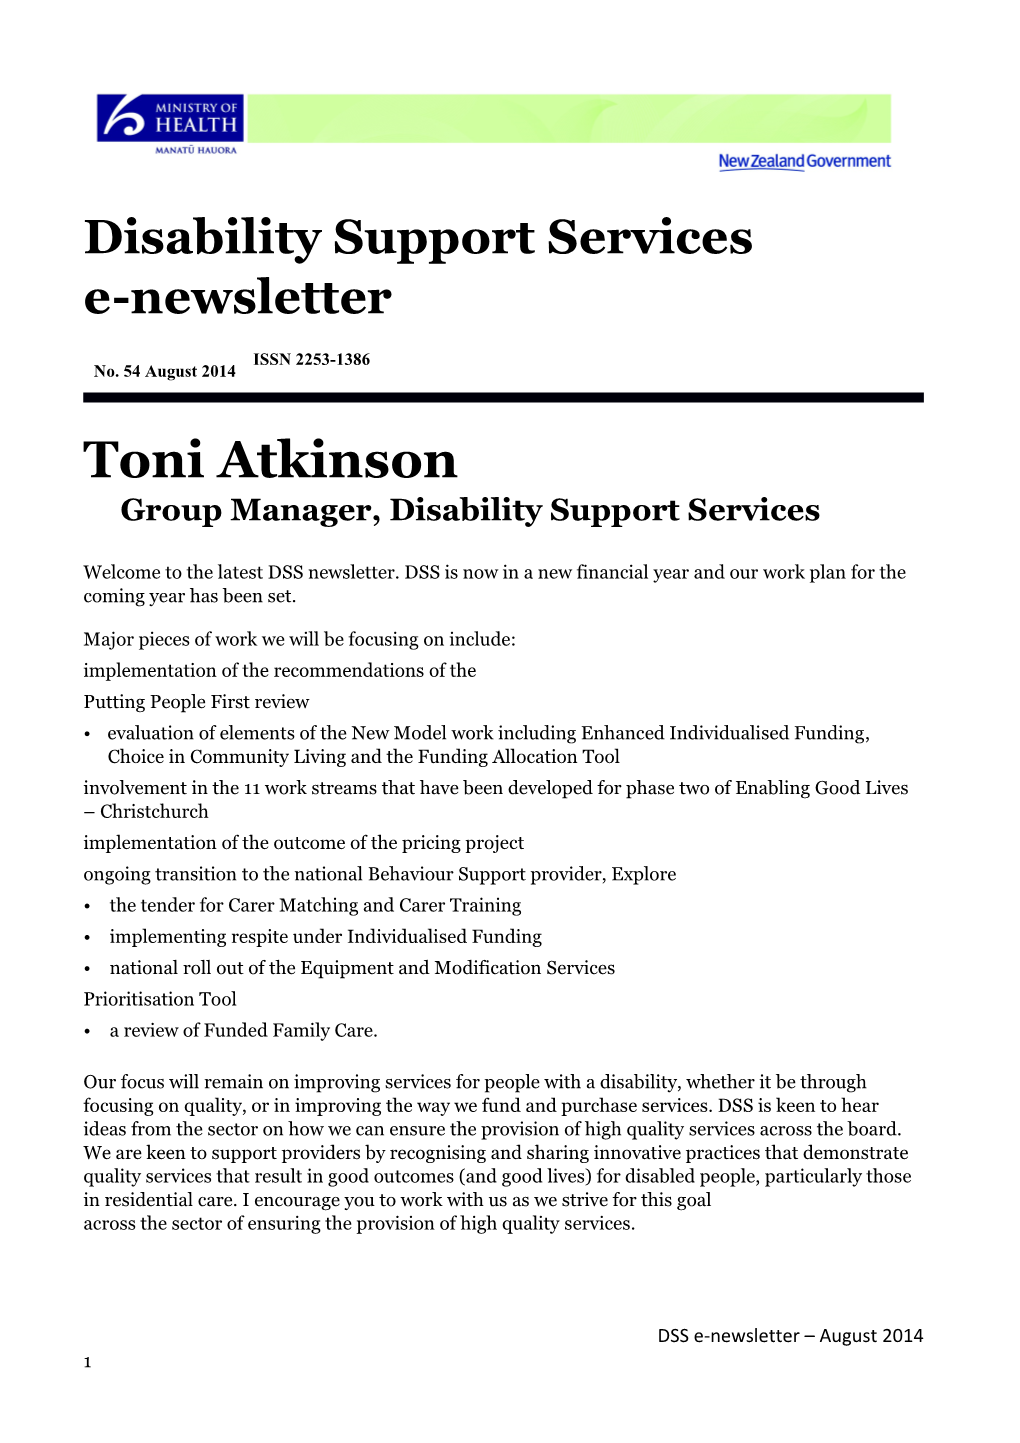 Toni Atkinsongroup Manager, Disability Support Services